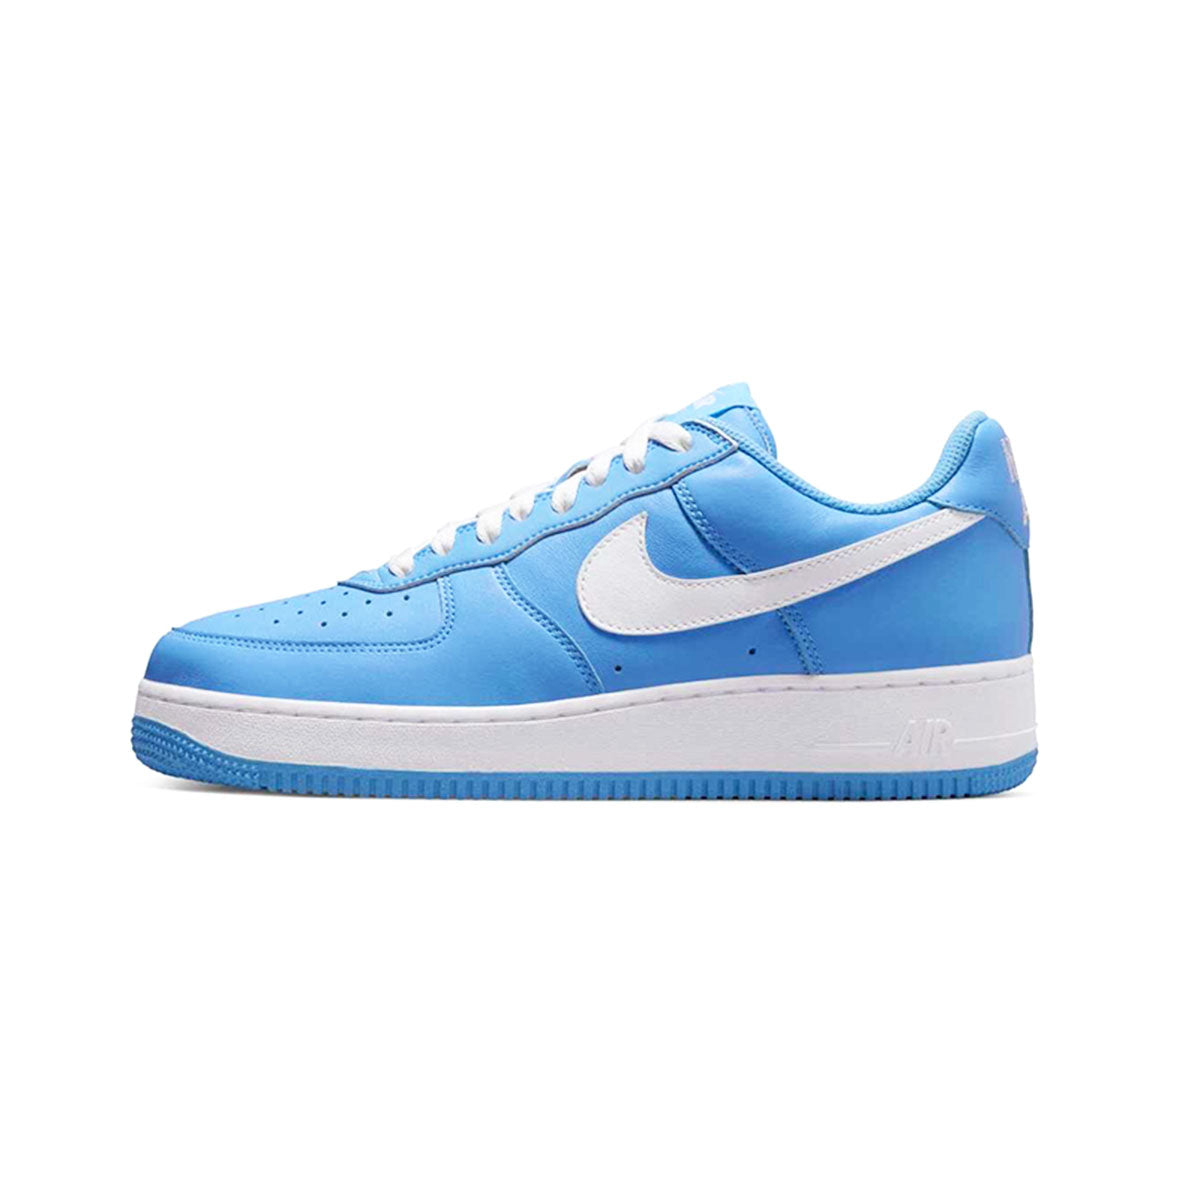 NIKE AIR FORCE 1 LOW RETRO "COLOR OF THE MONTH - UNIVERSITY BLUE" Nike Air Force 1 Low Retro "COLOR OF THE MONTH - UNIVERSITY BLUE" [DM0576-400]